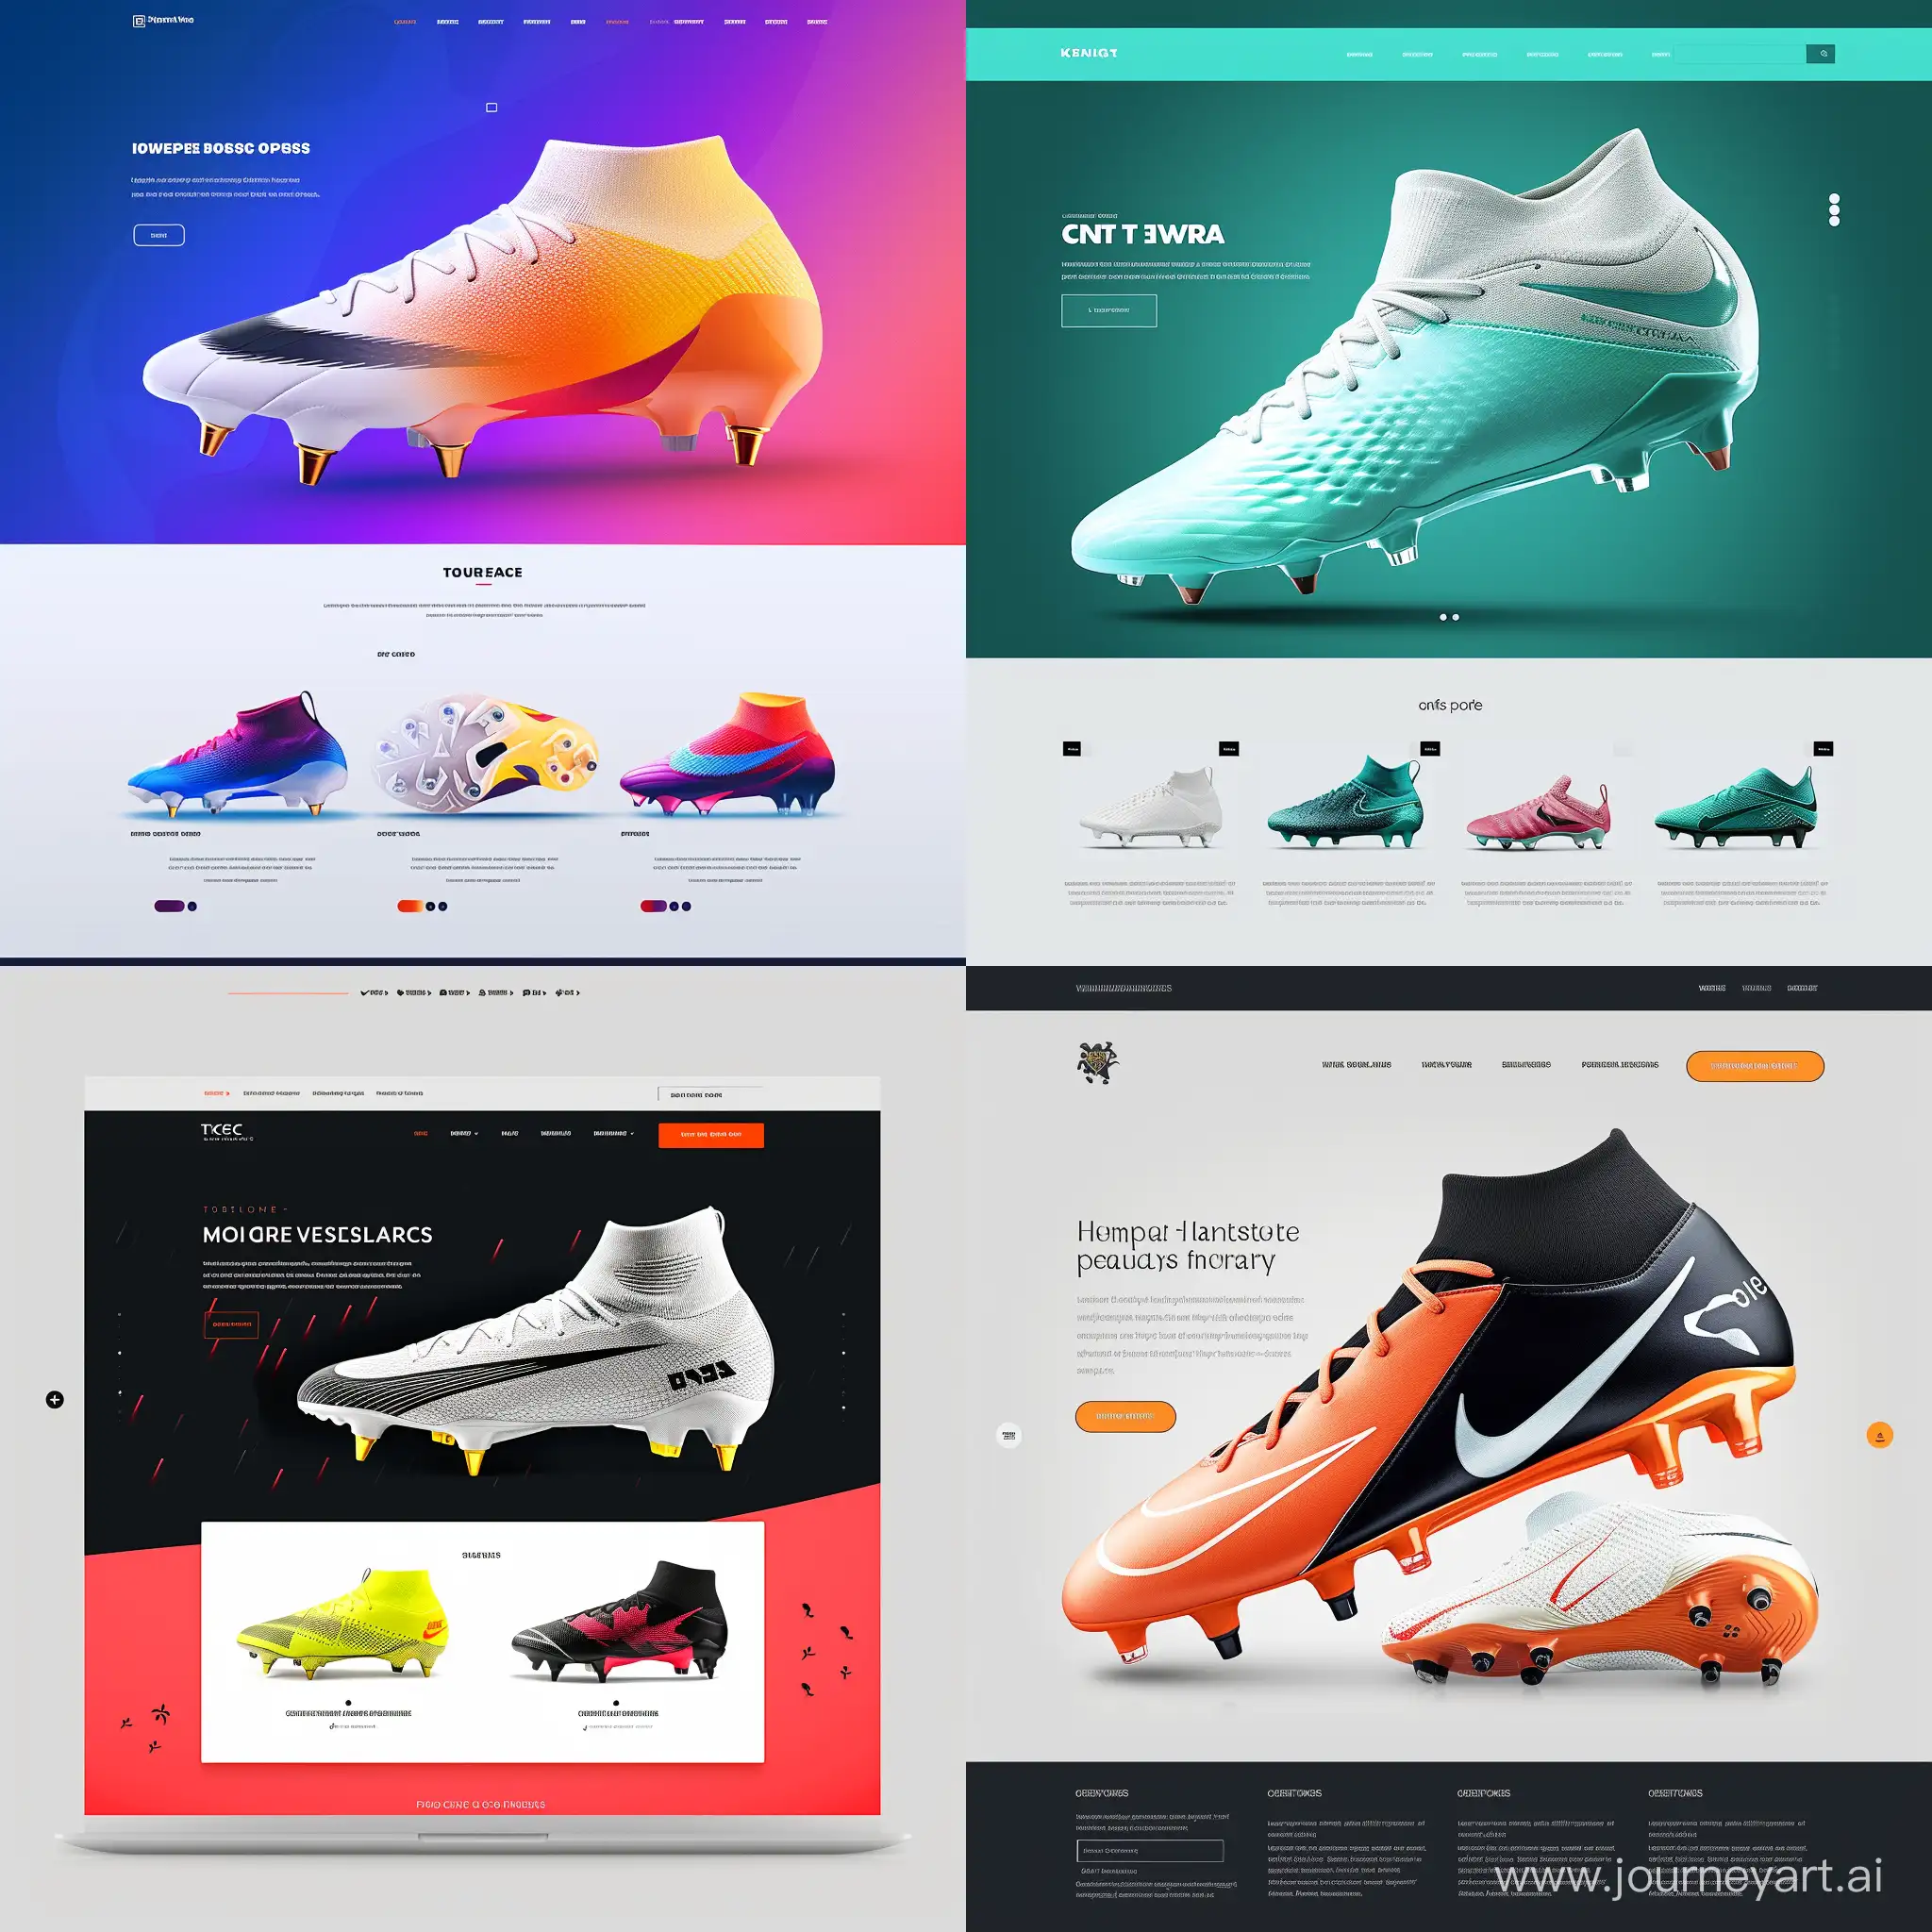 Design of a site selling football boots, minimalist, modern design harmonious color palette